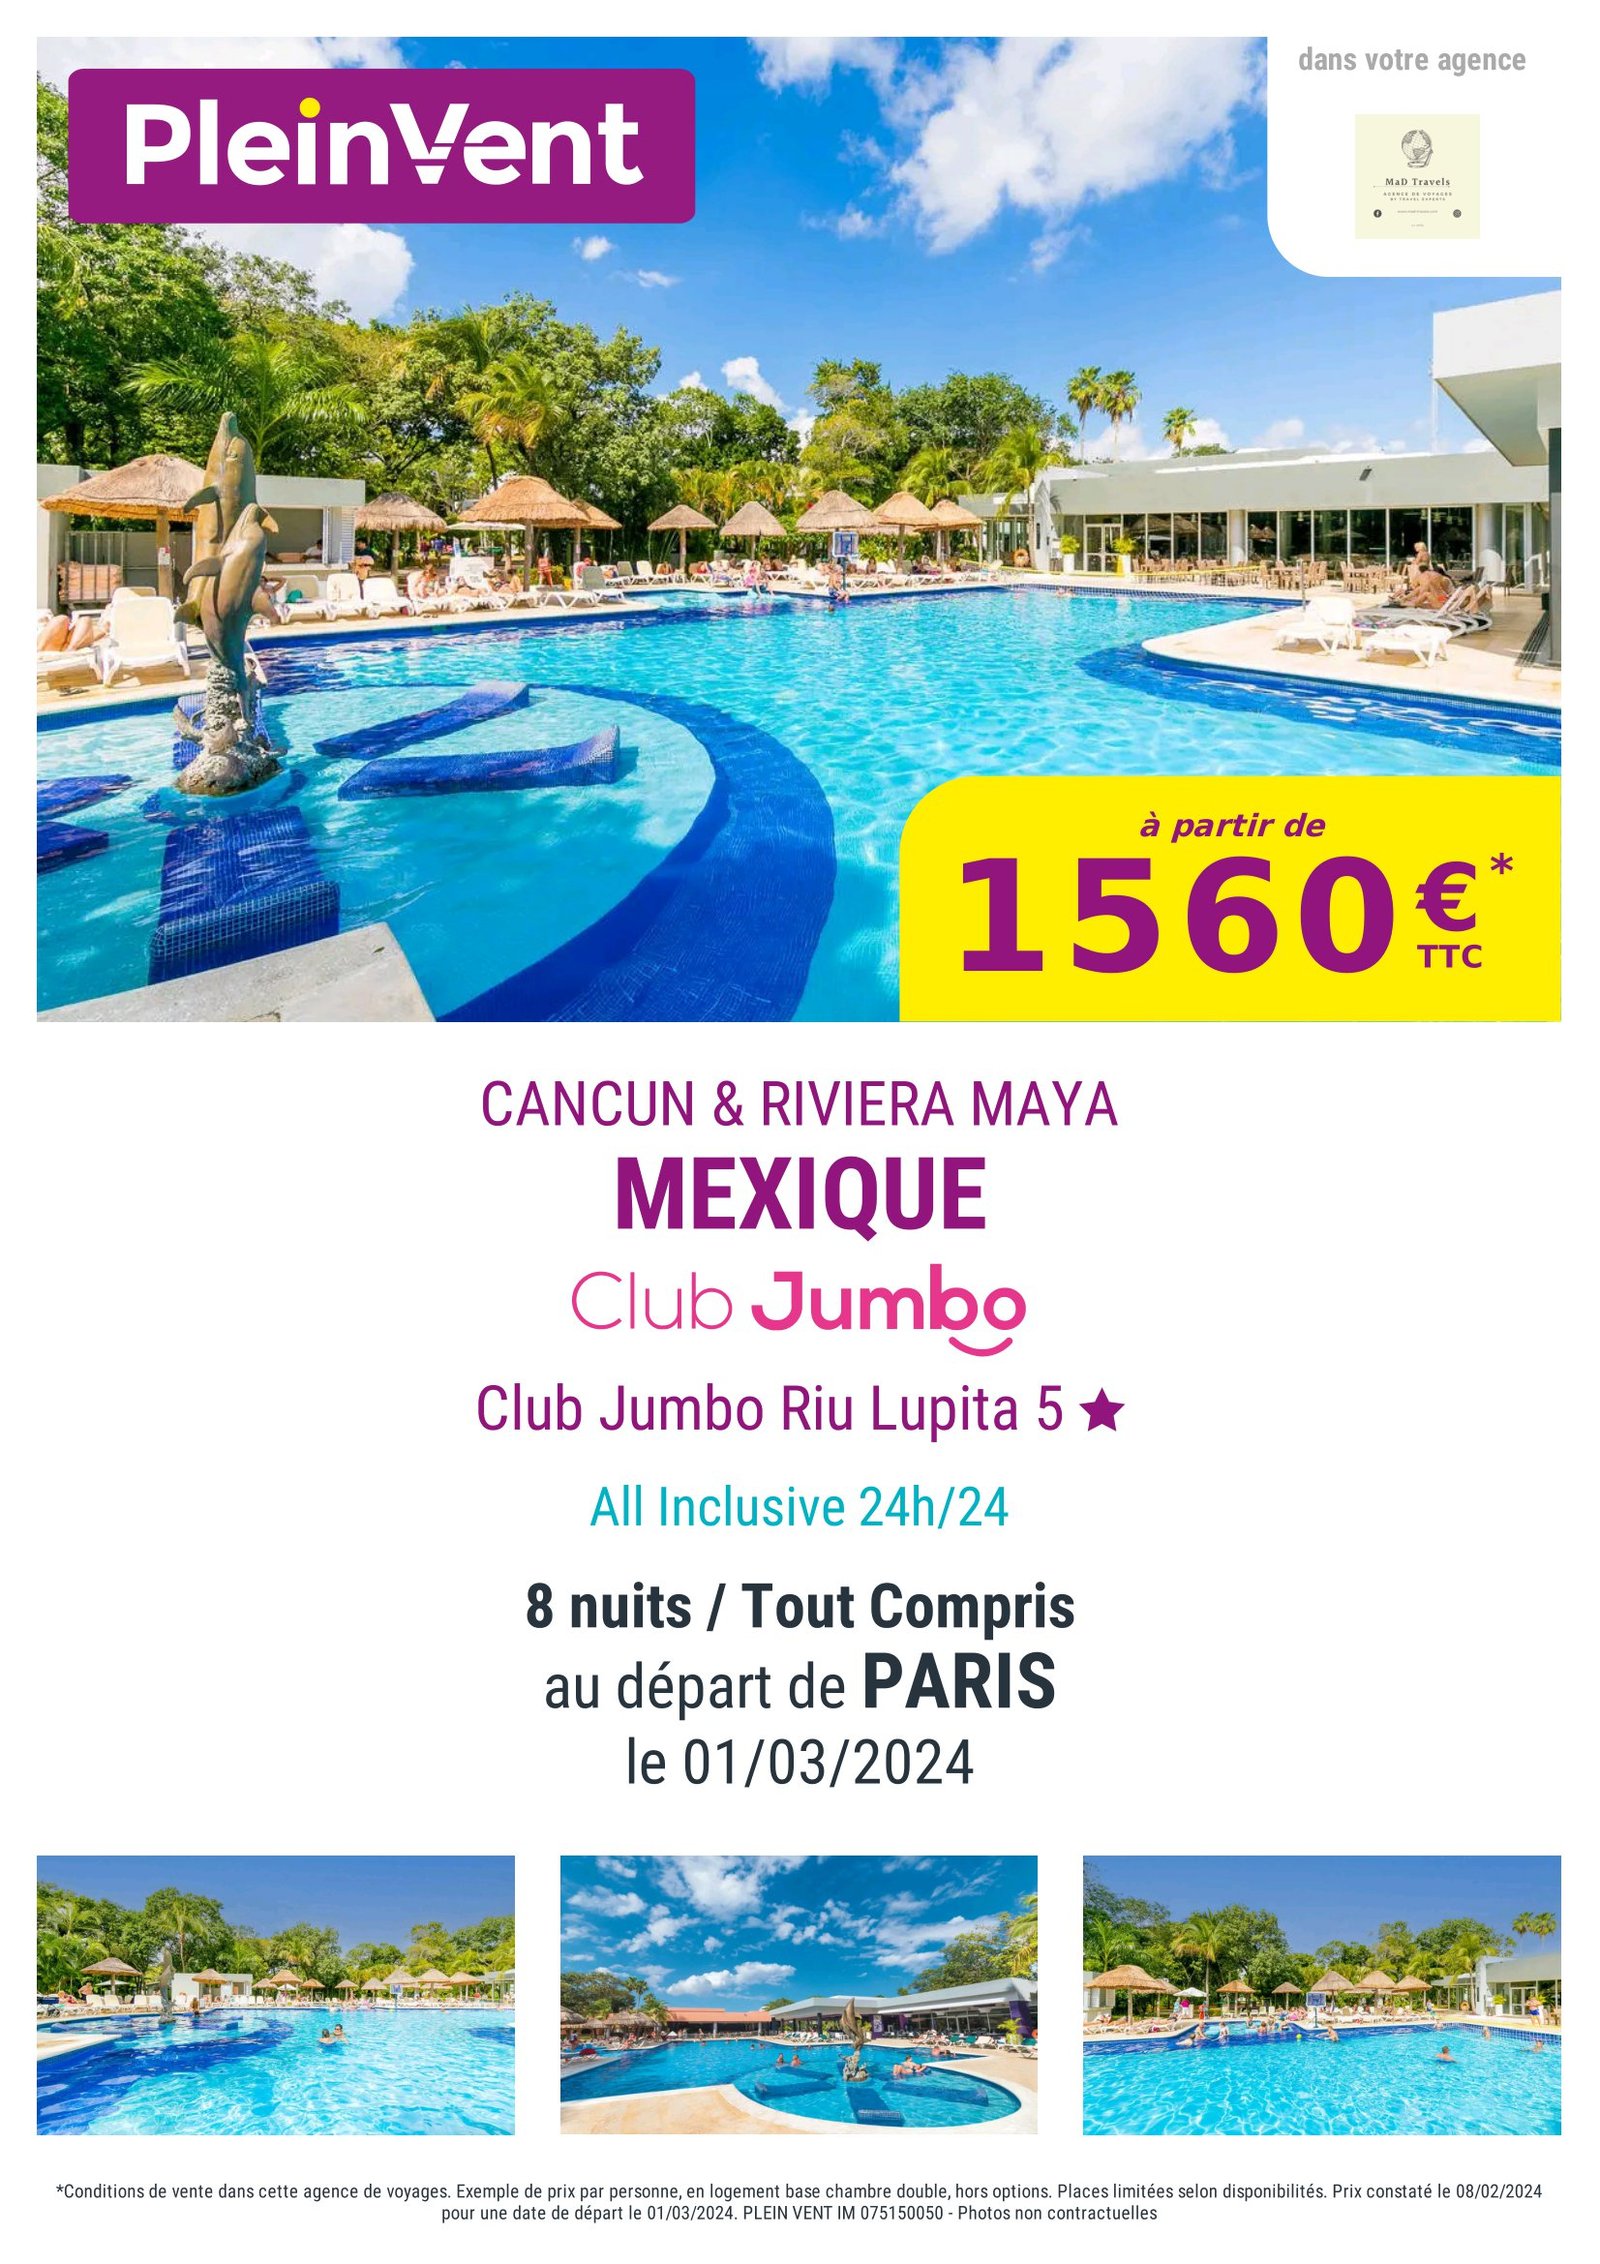 Promotions Mad Travels Mexique